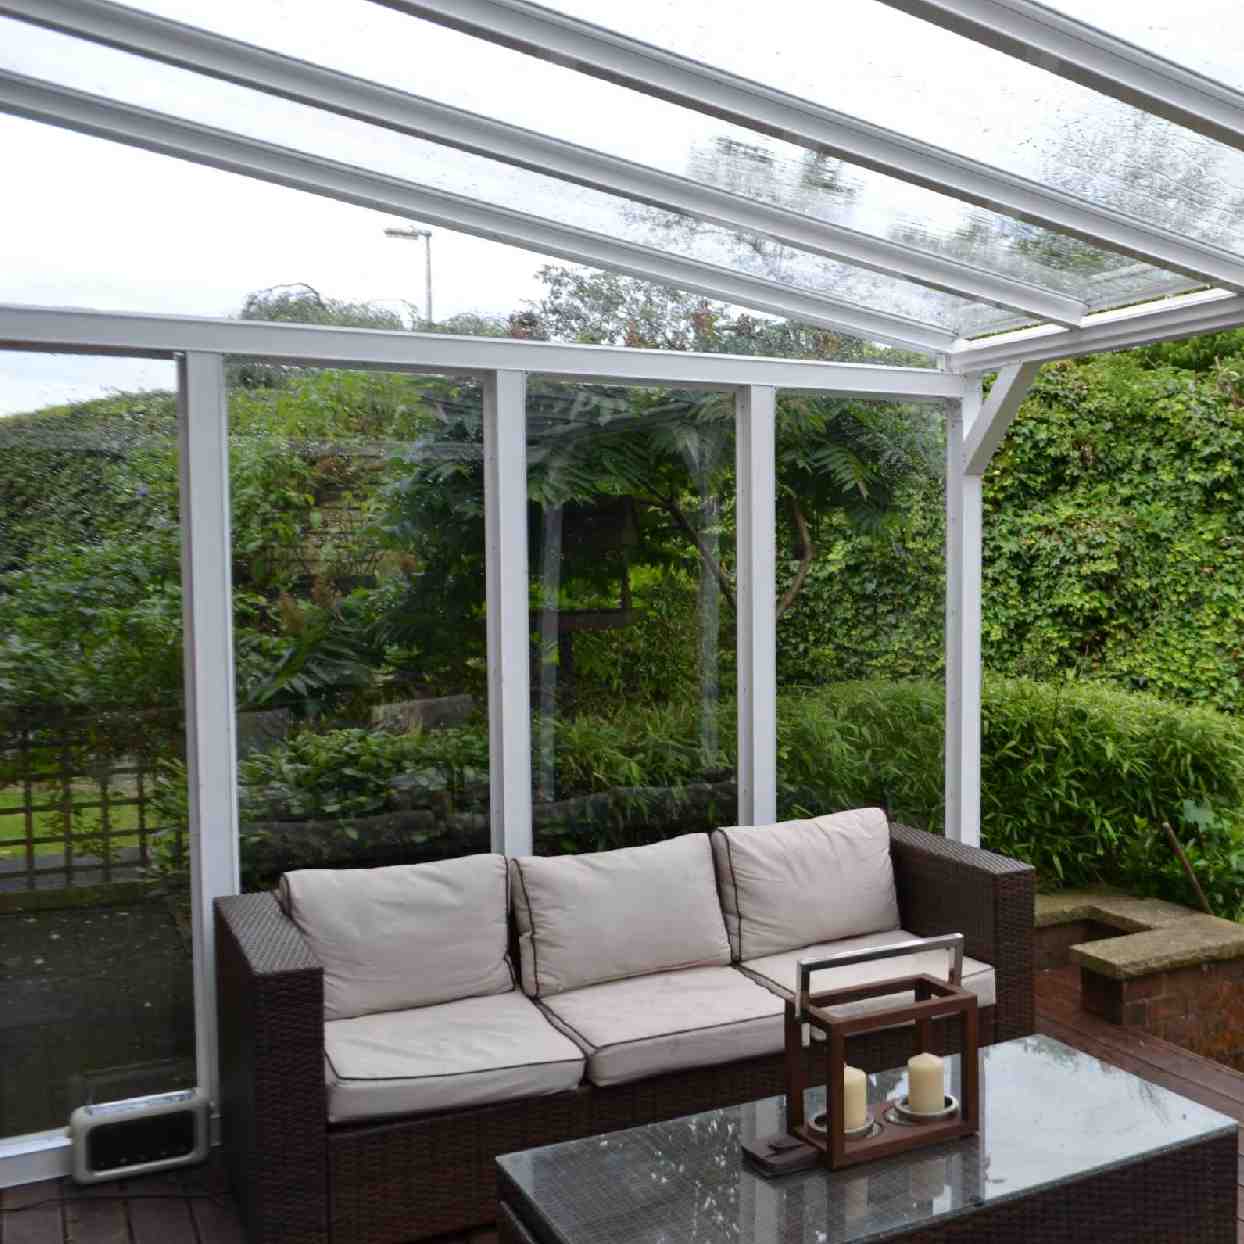 Buy Omega Verandah White with 6mm Glass Clear Plate Polycarbonate Glazing - 9.8m (W) x 2.5m (P), (5) Supporting Posts online today